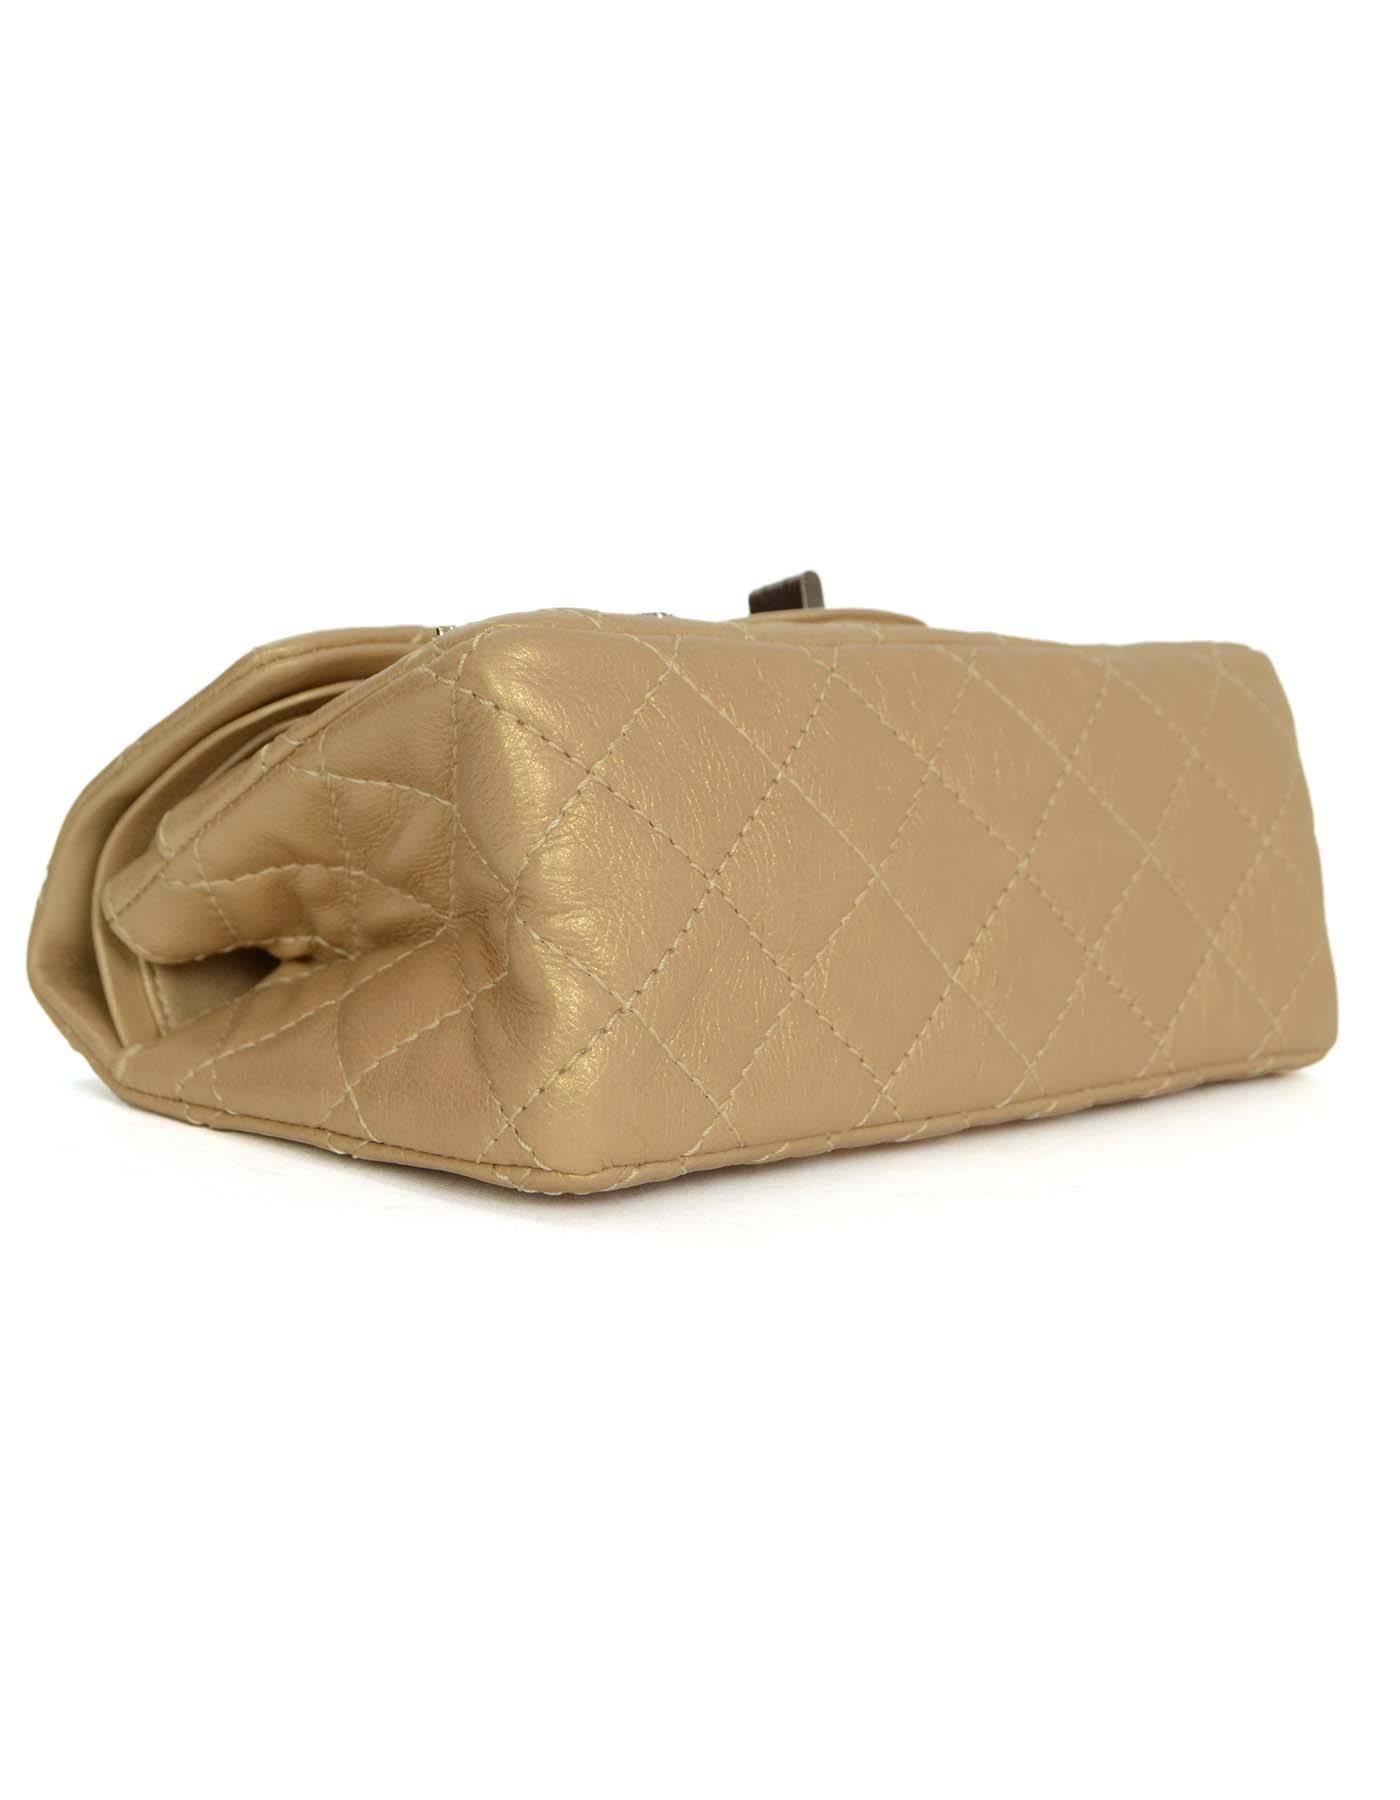 Chanel Rare Collectors Gold Distressed Lucky Charms ReIssue Bag 2.55 rt. $8, 775 In Excellent Condition In New York, NY